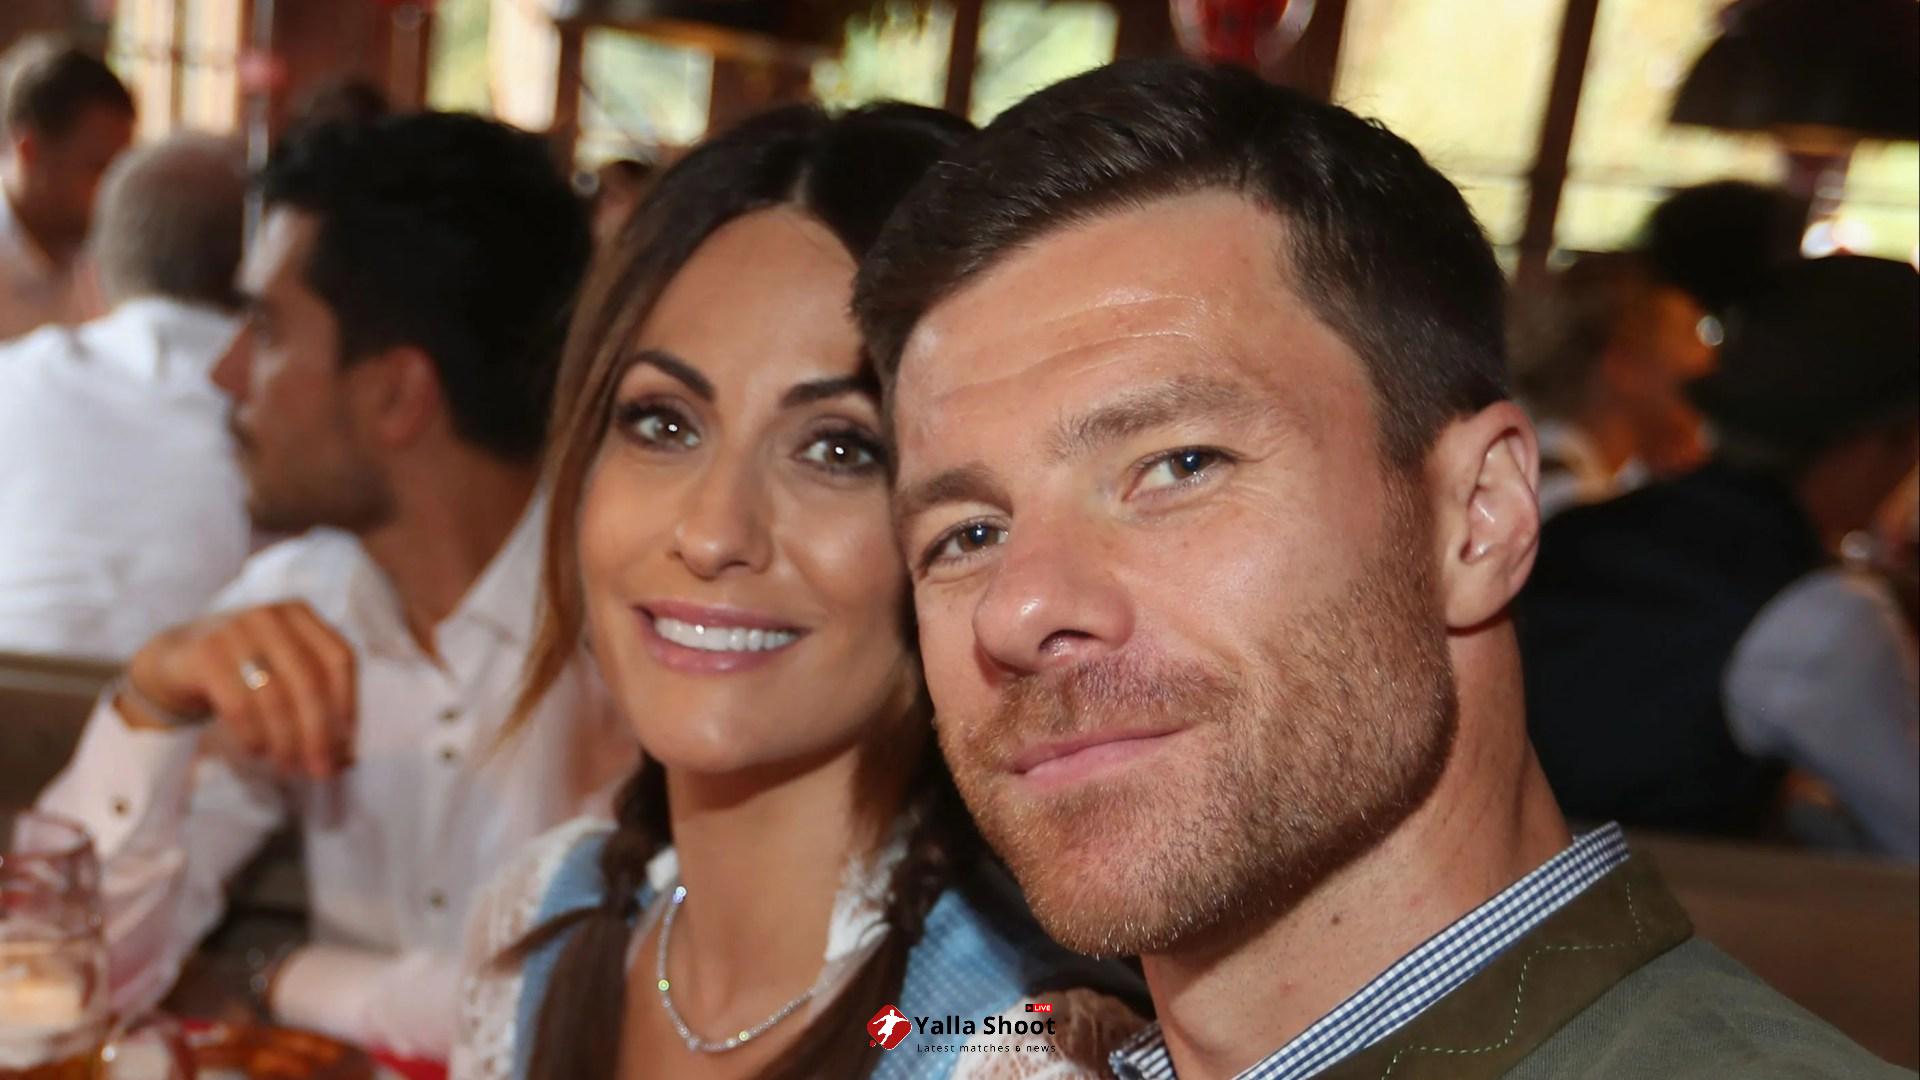 Inside Xabi Alonso's glamorous life, from wife who Liverpool team-mate tried to pull to model shoots and love of cars